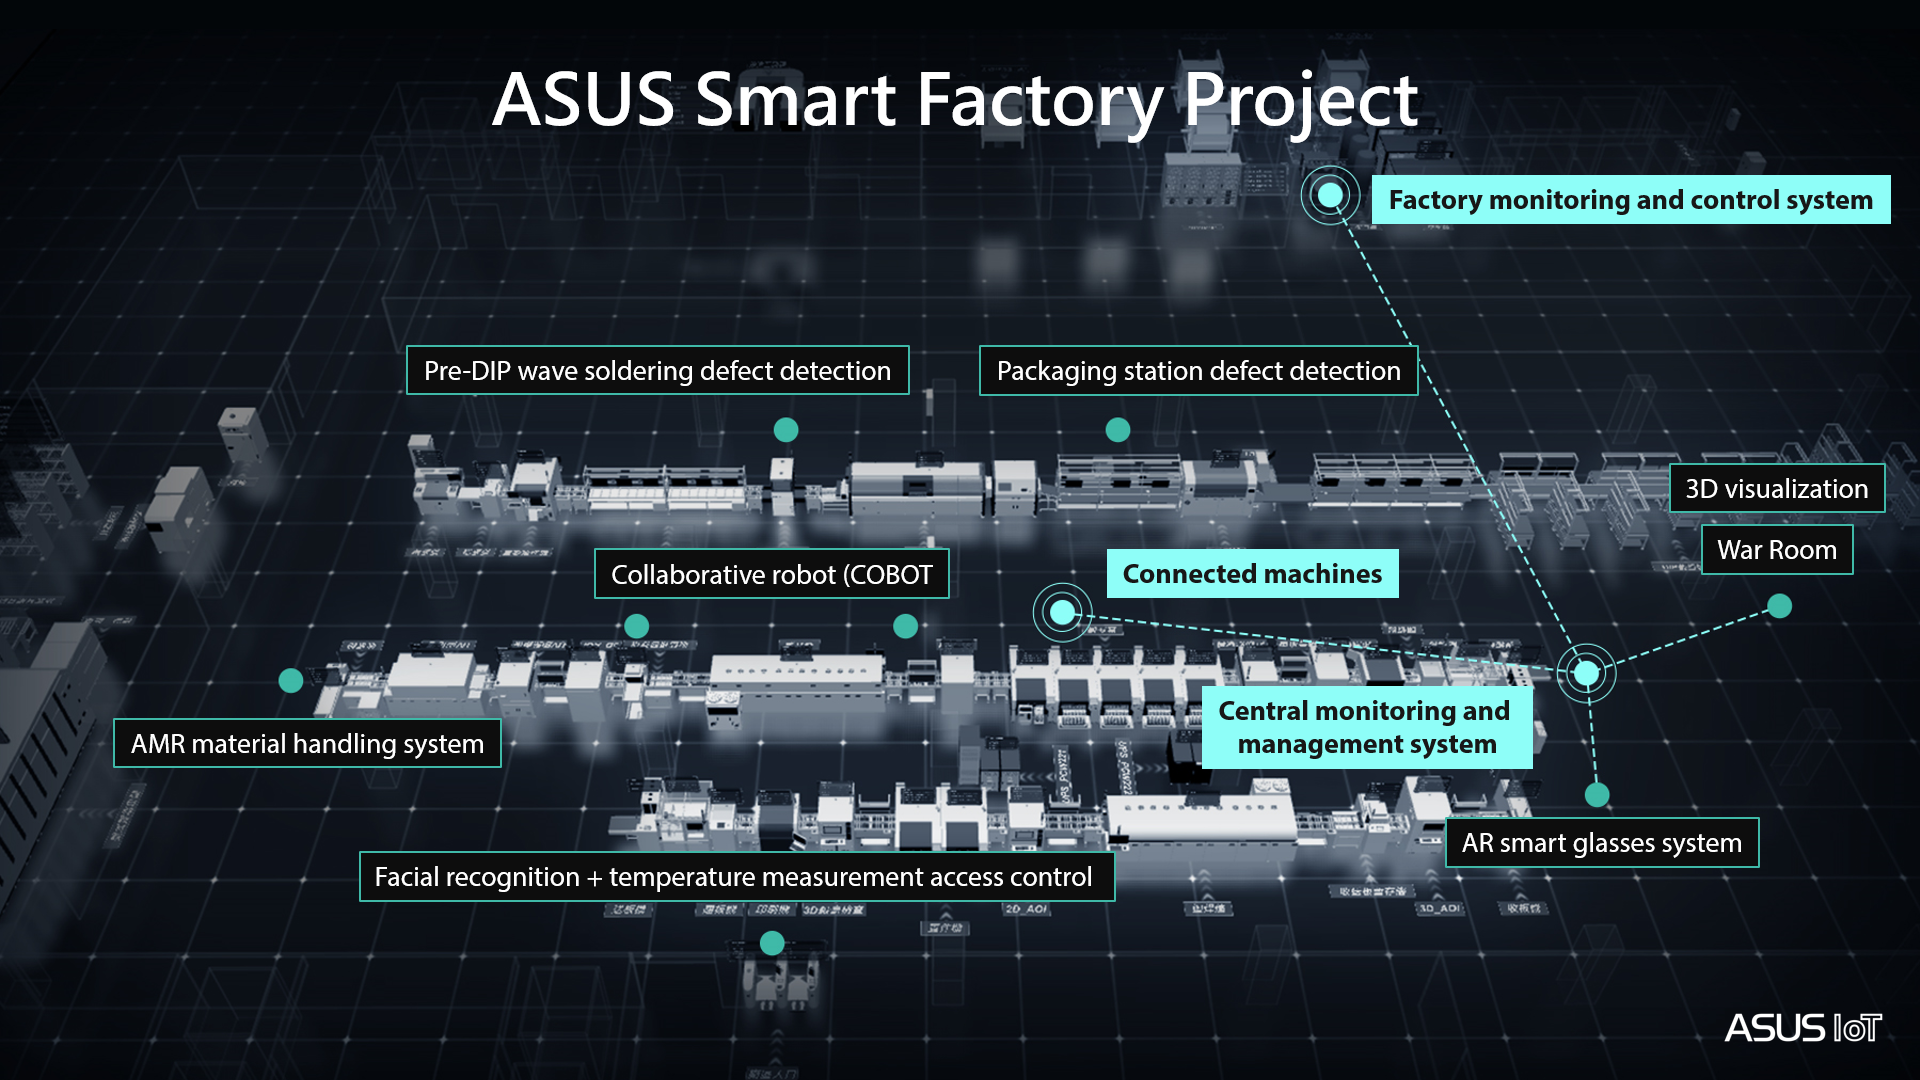 3D top view of ASUS IoT AI factory in Shulin, highlighting smart brain central monitoring and management system with integrated big data.